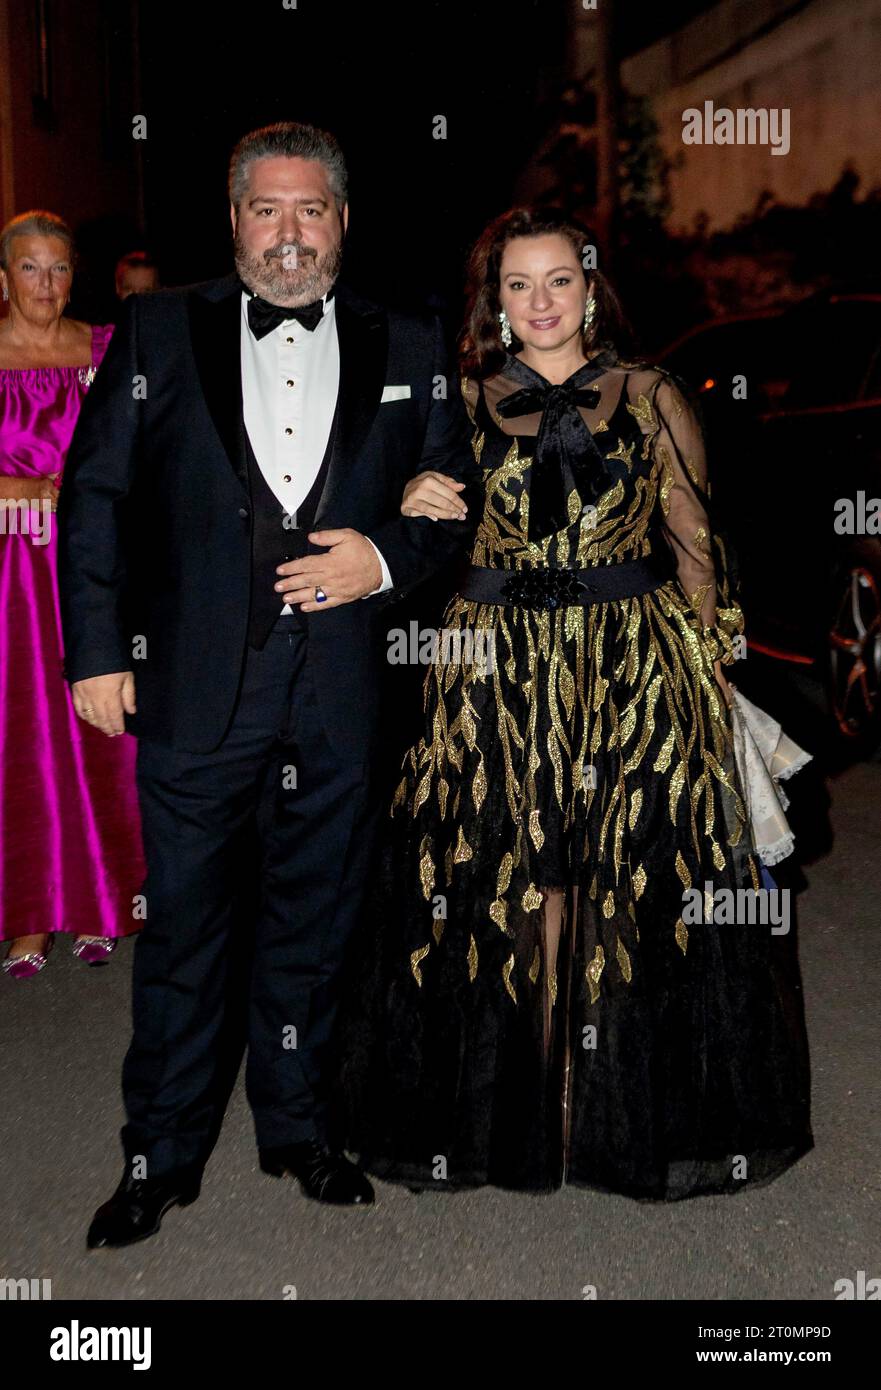 Sintra, Portugal. 07th Oct, 2023. Grand Duke George Mikhailovich of Russia and Princess Victoria Romanov arrive at Sao Pedro de Penaferrim in Sintra, on October 07, 2023, to attend a dinner on the occasion of the Wedding of Princess Maria Francisca de Braganza and Duarte de Sousa Araujo Martins Credit: Albert Nieboer/Netherlands OUT/Point de Vue OUT/dpa/Alamy Live News Stock Photo